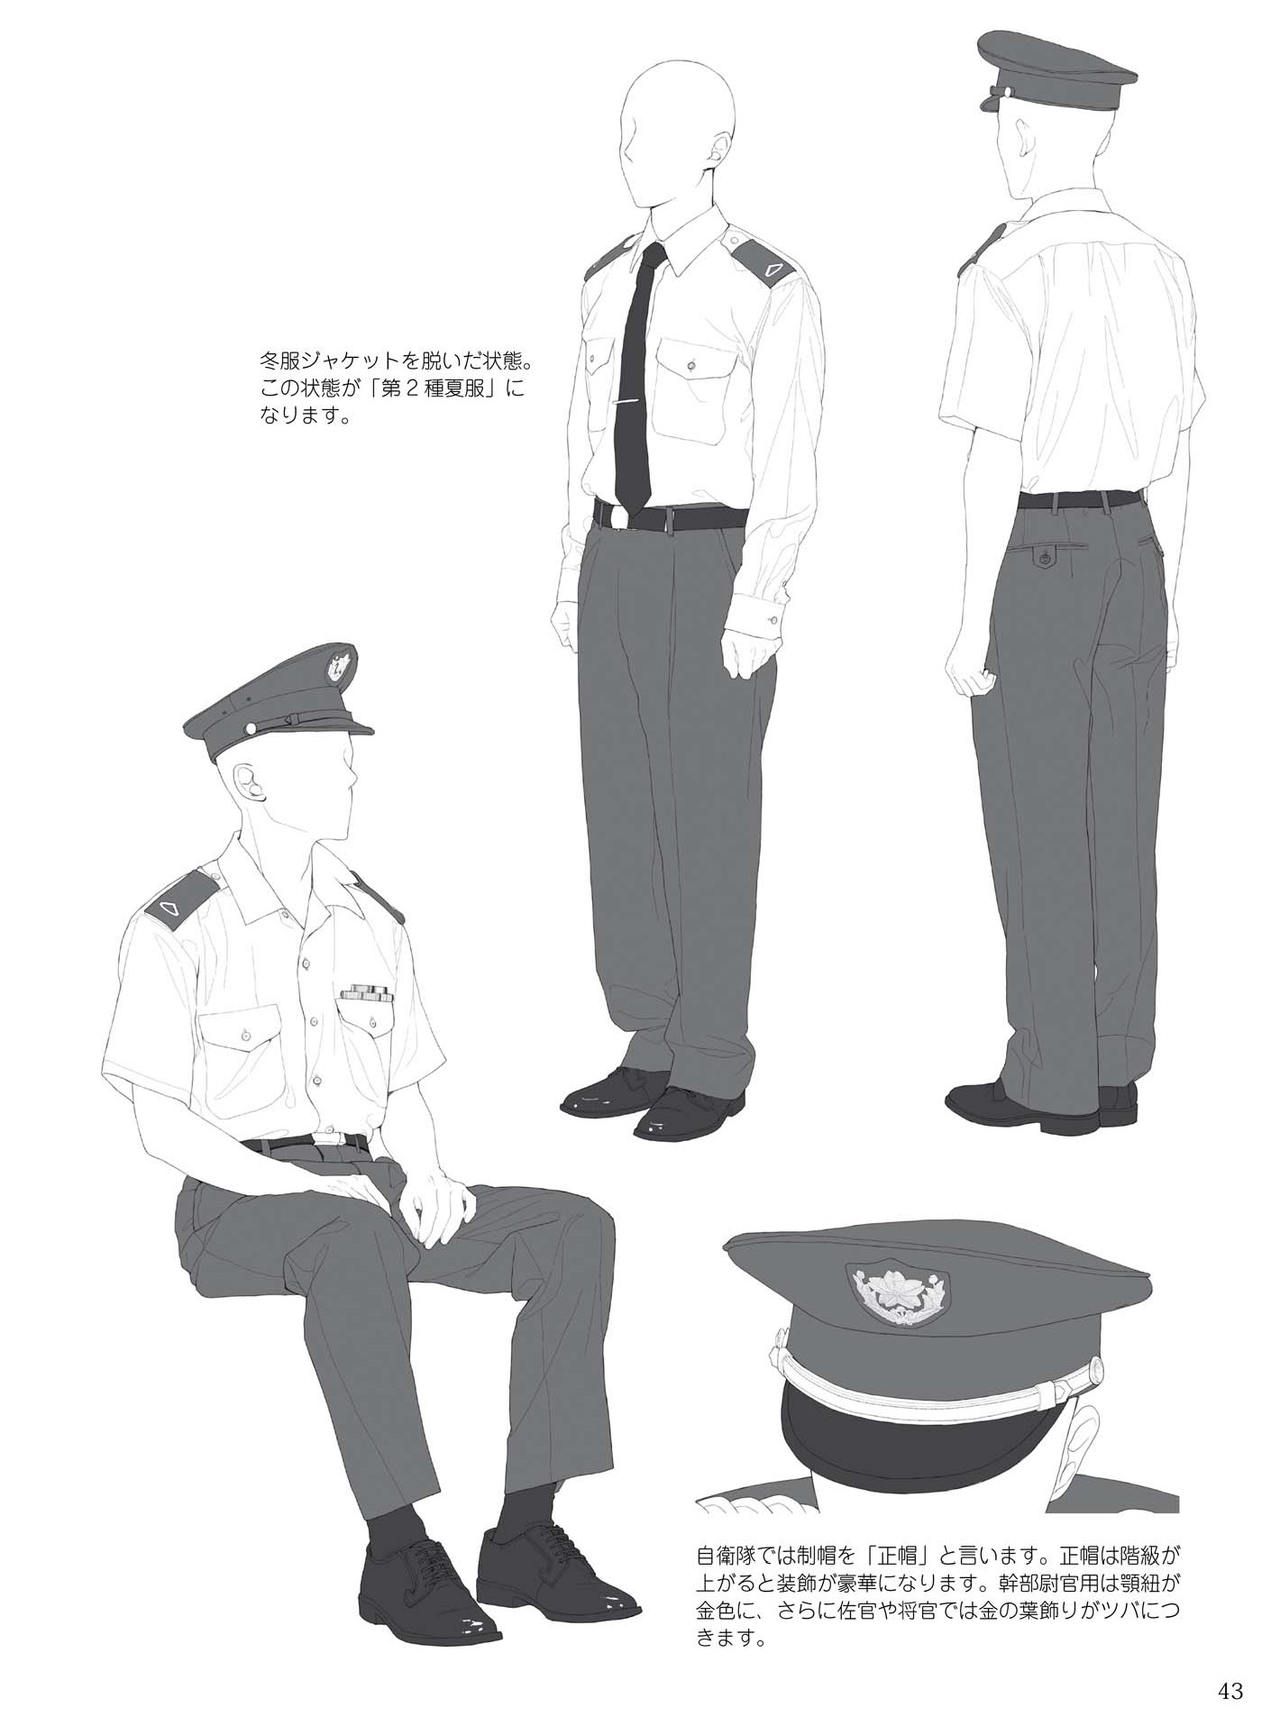 How to draw military uniforms and uniforms From Self-Defense Forces 軍服・制服の描き方 アメリカ軍・自衛隊の制服から戦闘服まで 46